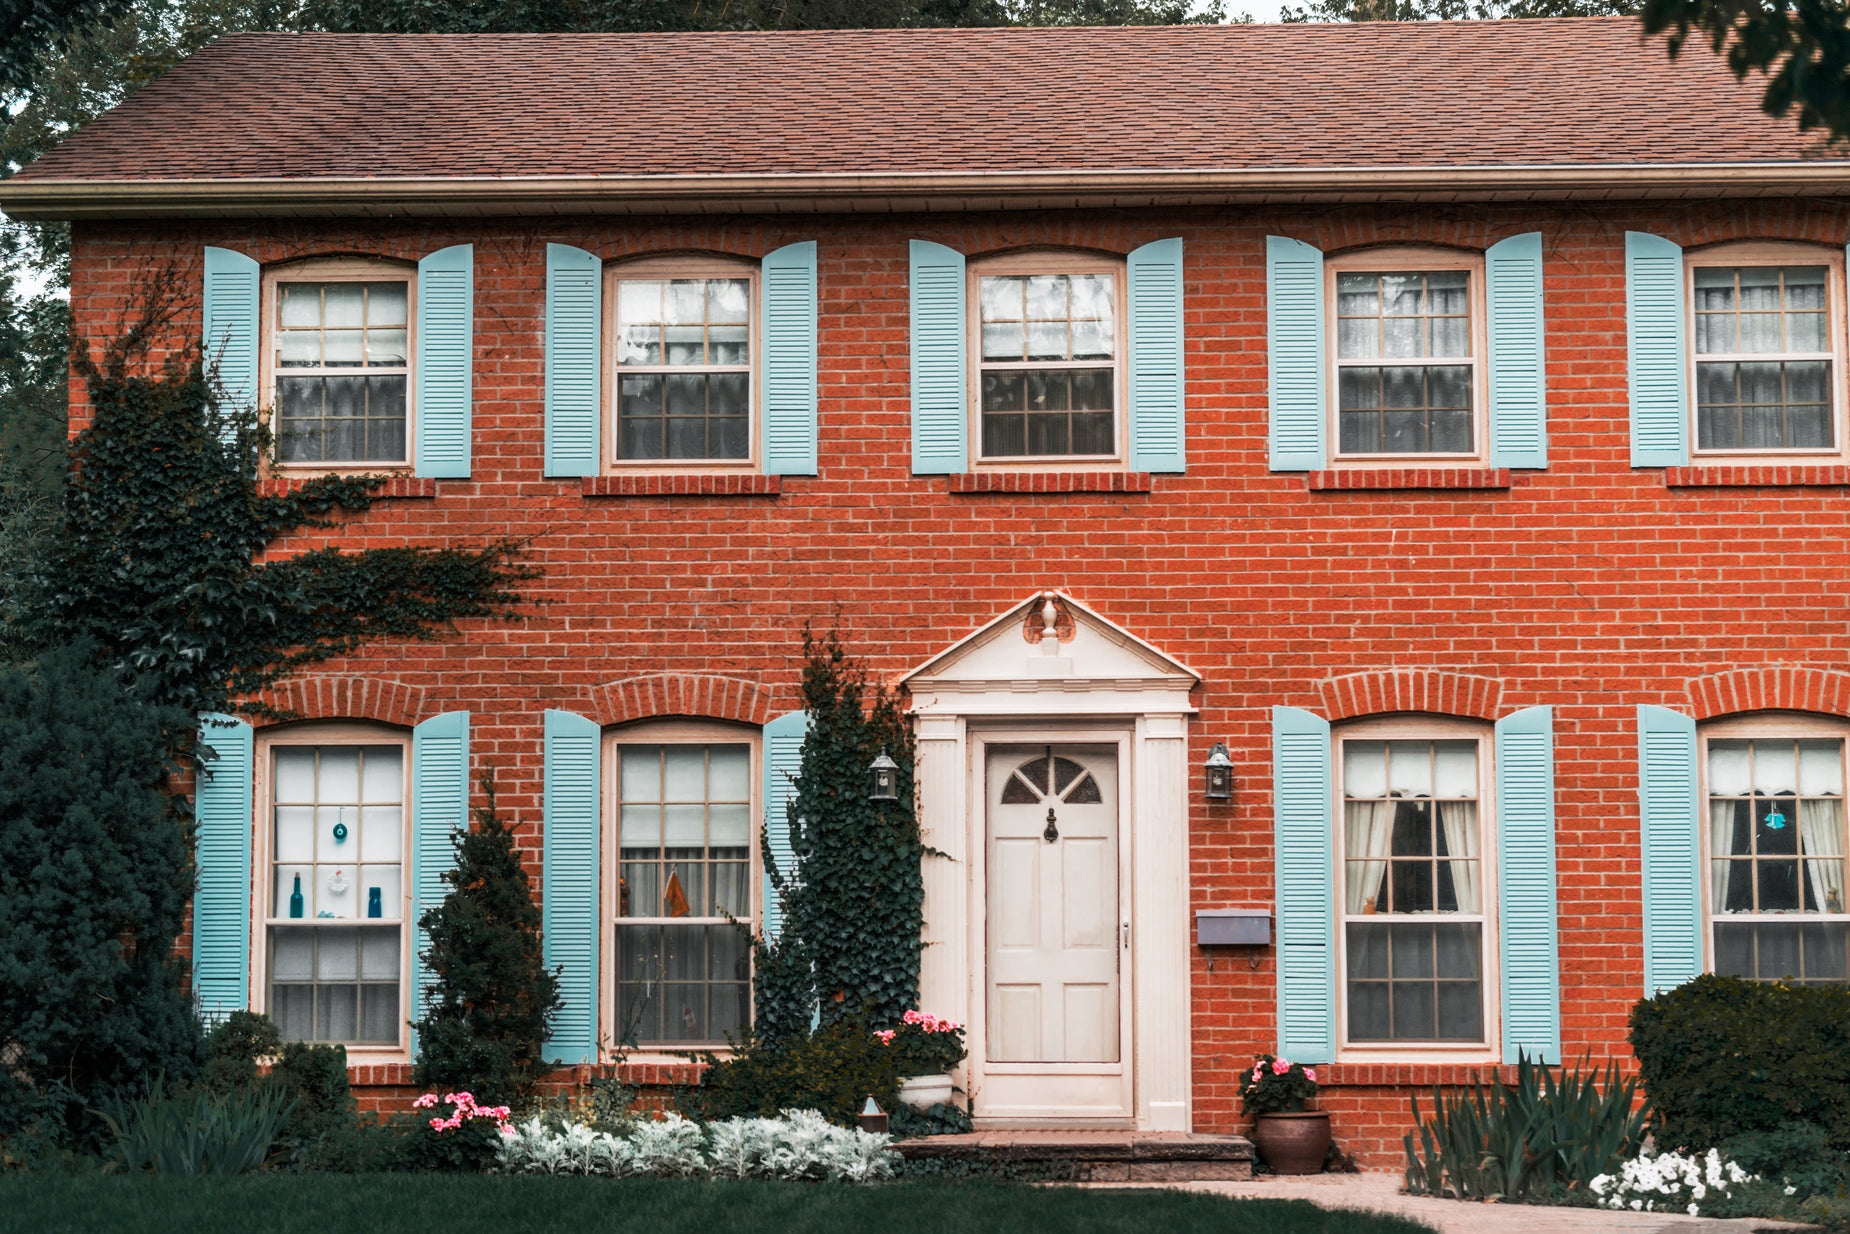 the exterior of a large red brick home with blue shutters